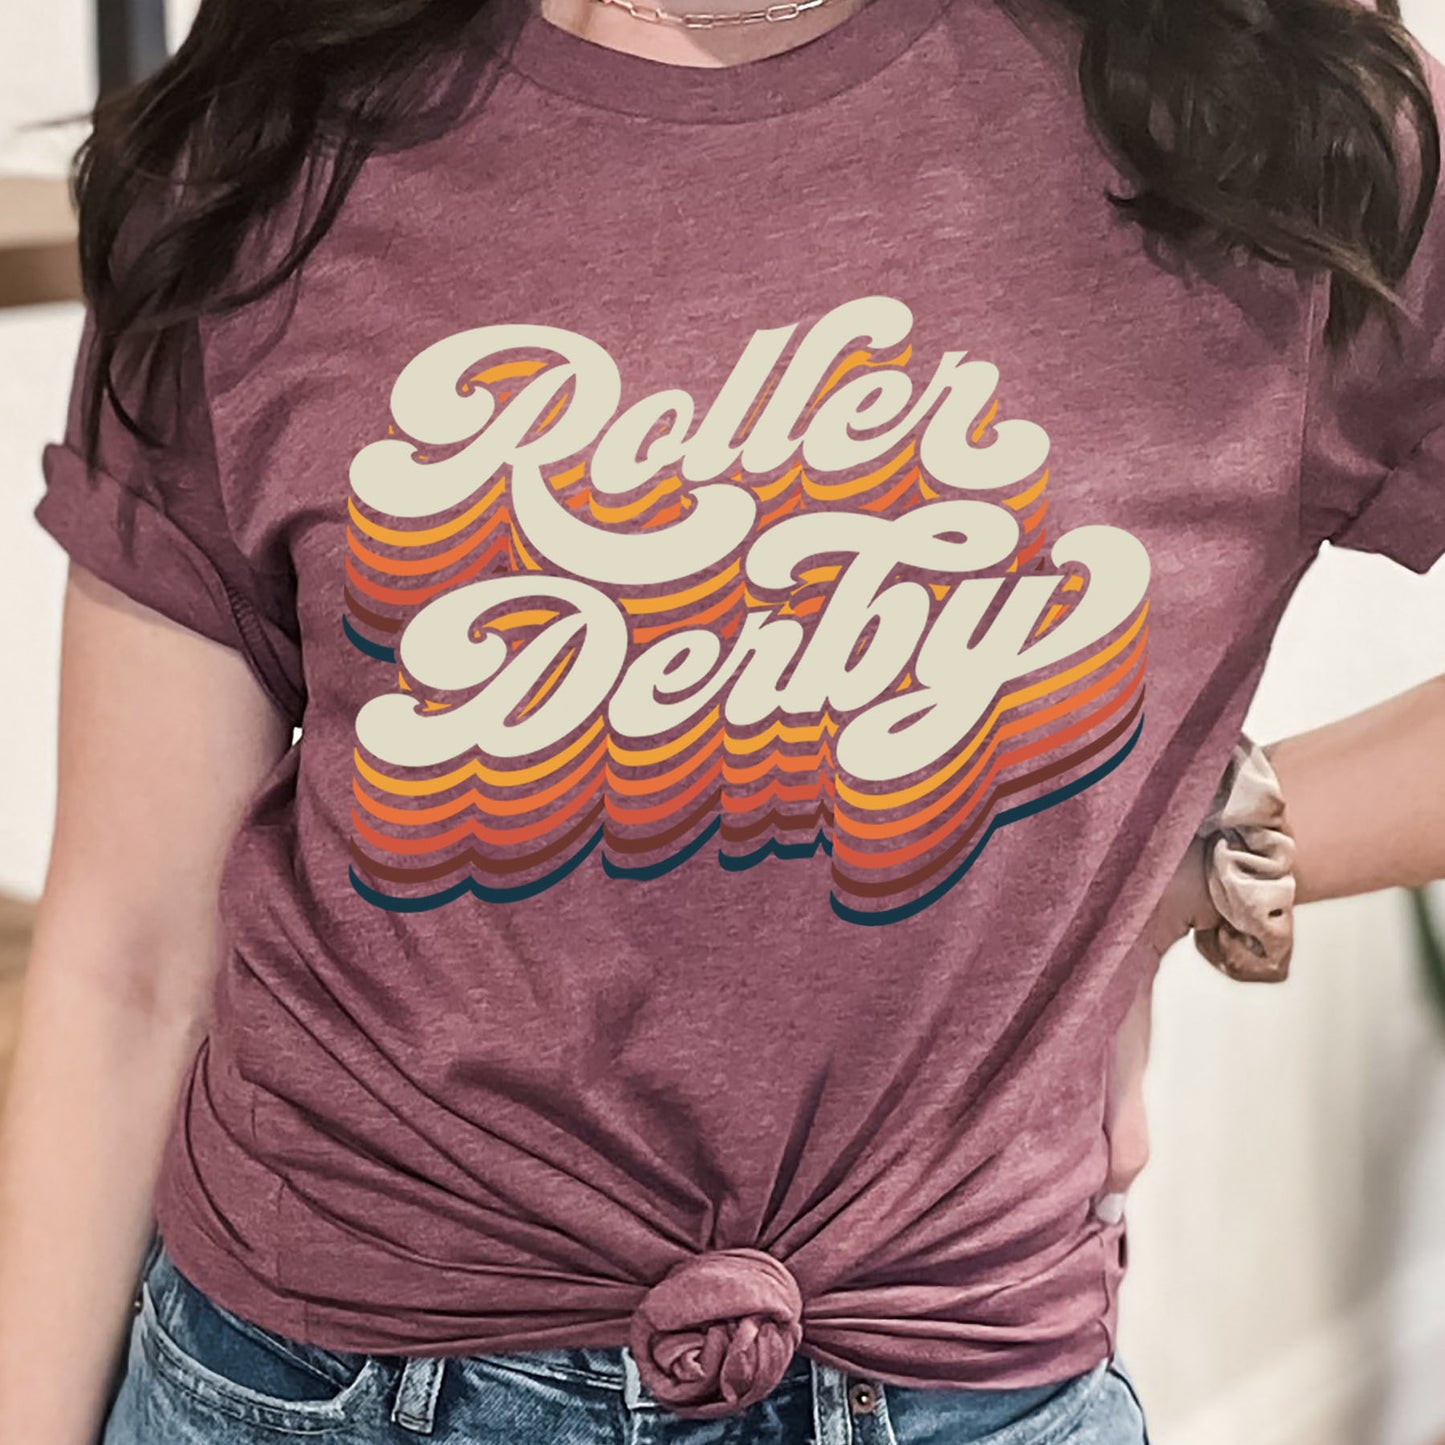 Dropping Vibes Roller Derby Maroon Short-Sleeve Unisex T-Shirt